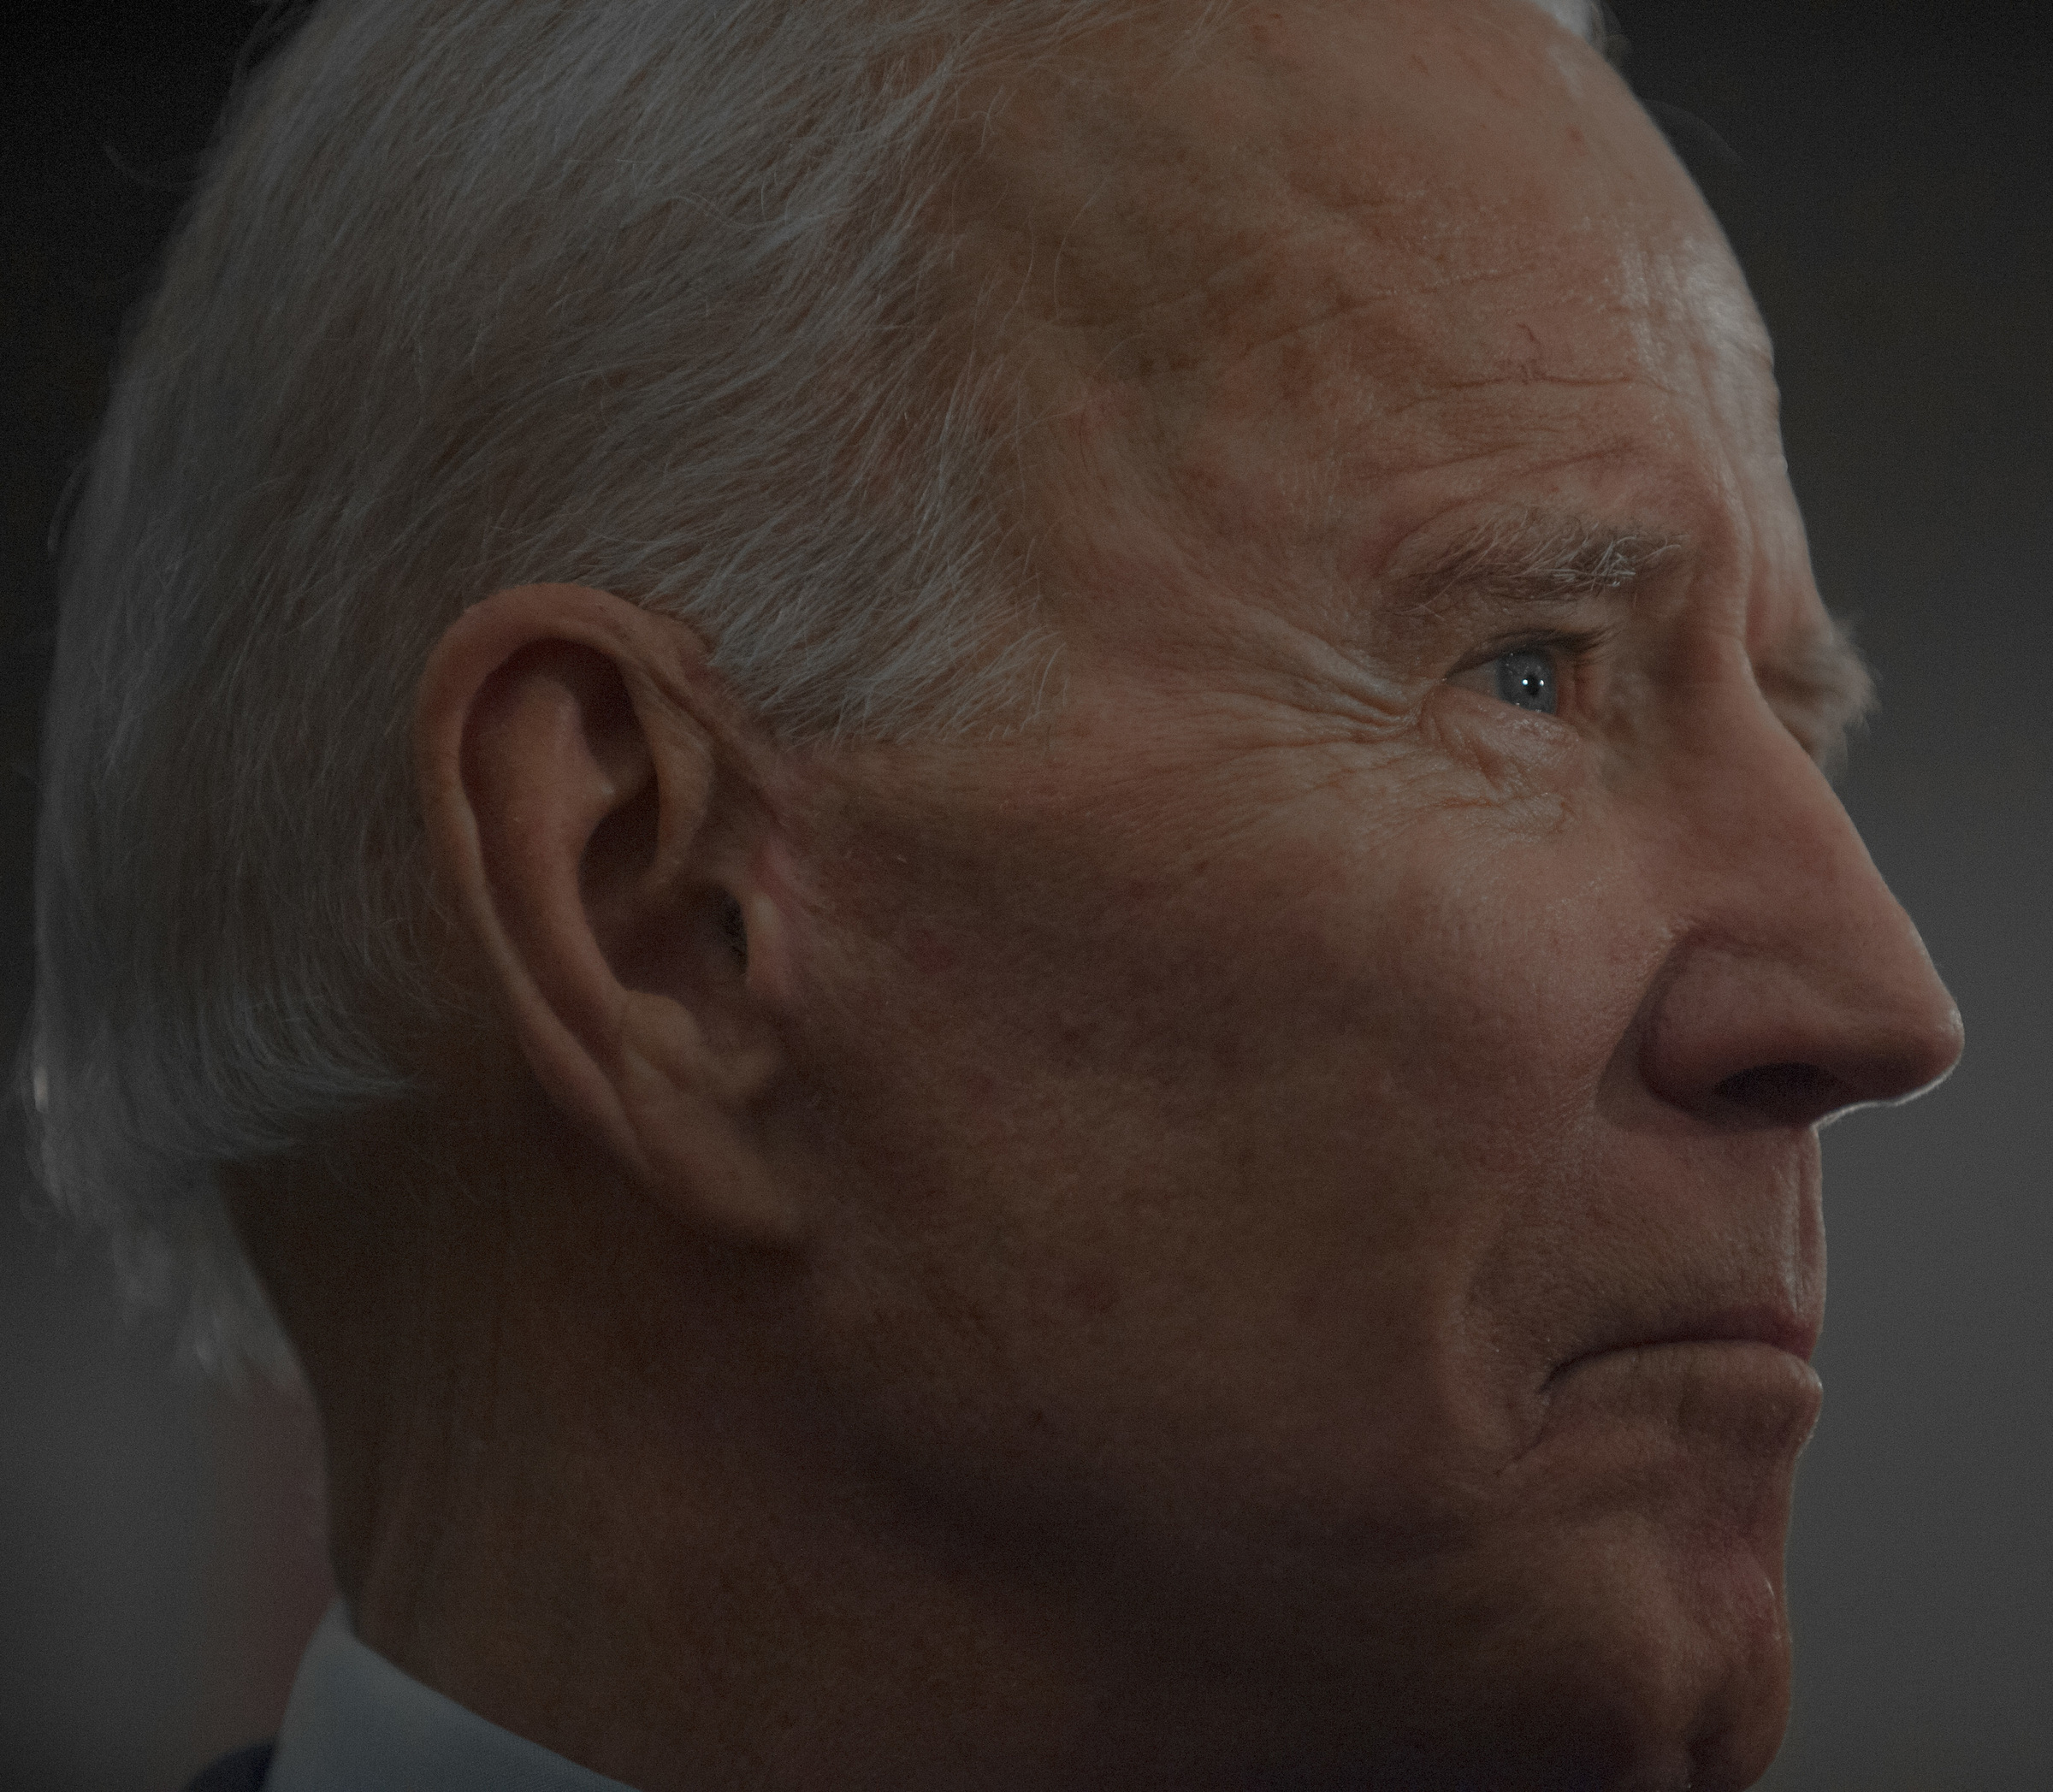 Presidential candidate former Vice President Joe Biden speaks to his supporters in Fort Dodge, Iowa on Jan. 21, 2020. September Dawn Bottoms for TIME